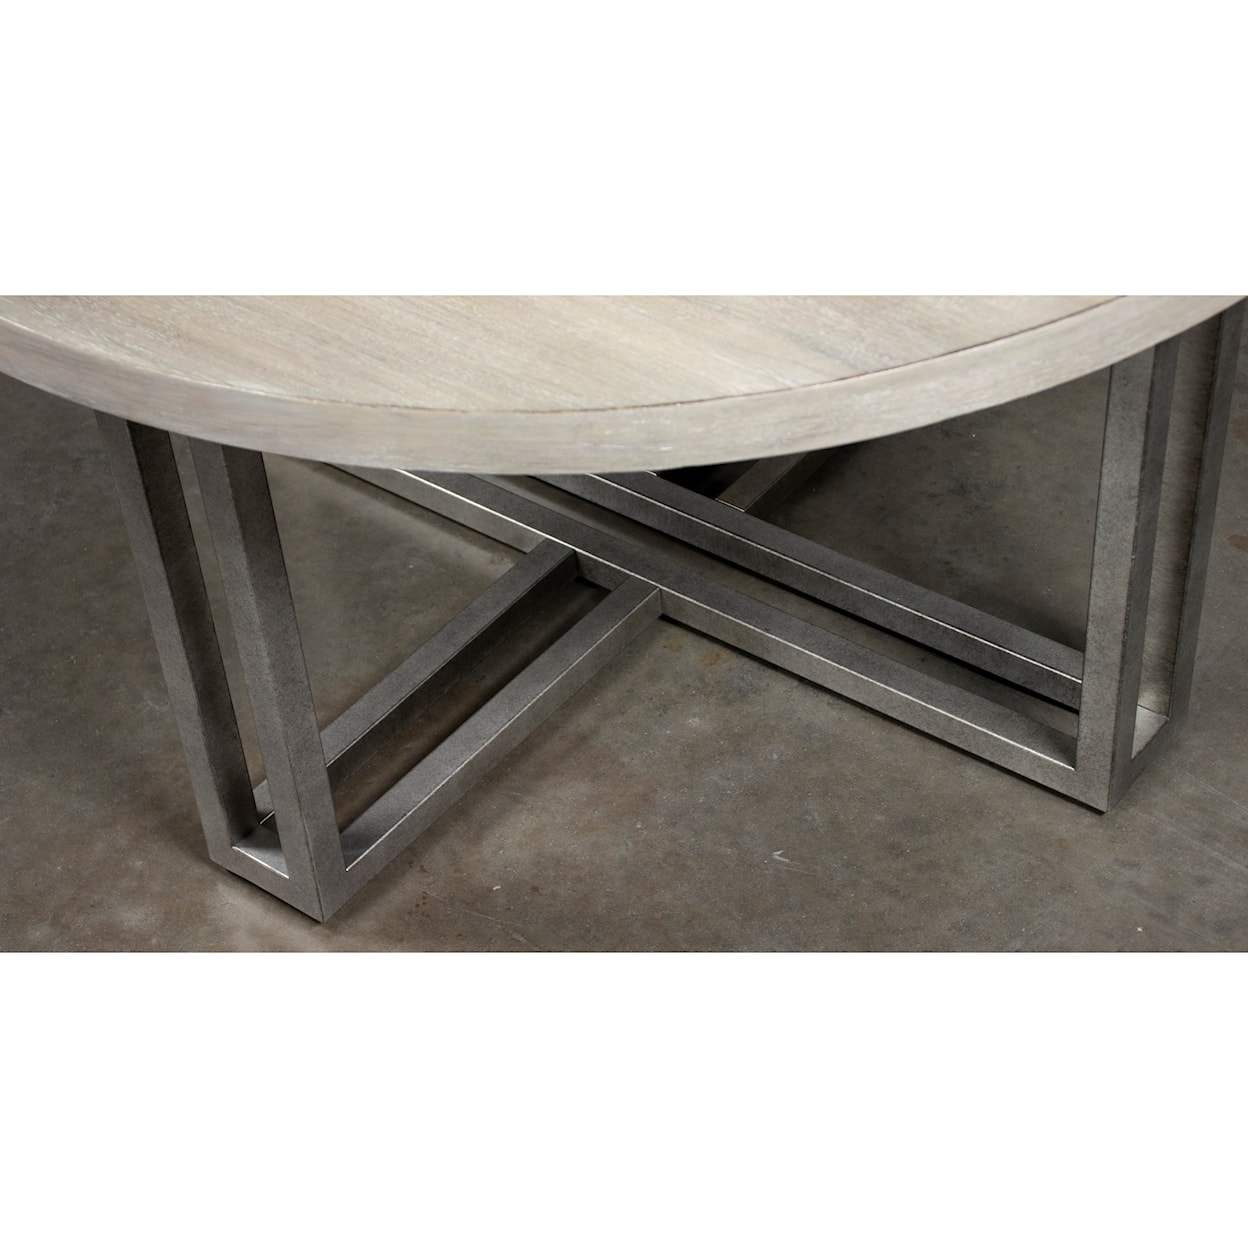 Riverside Furniture Adelyn Round Cocktail Table